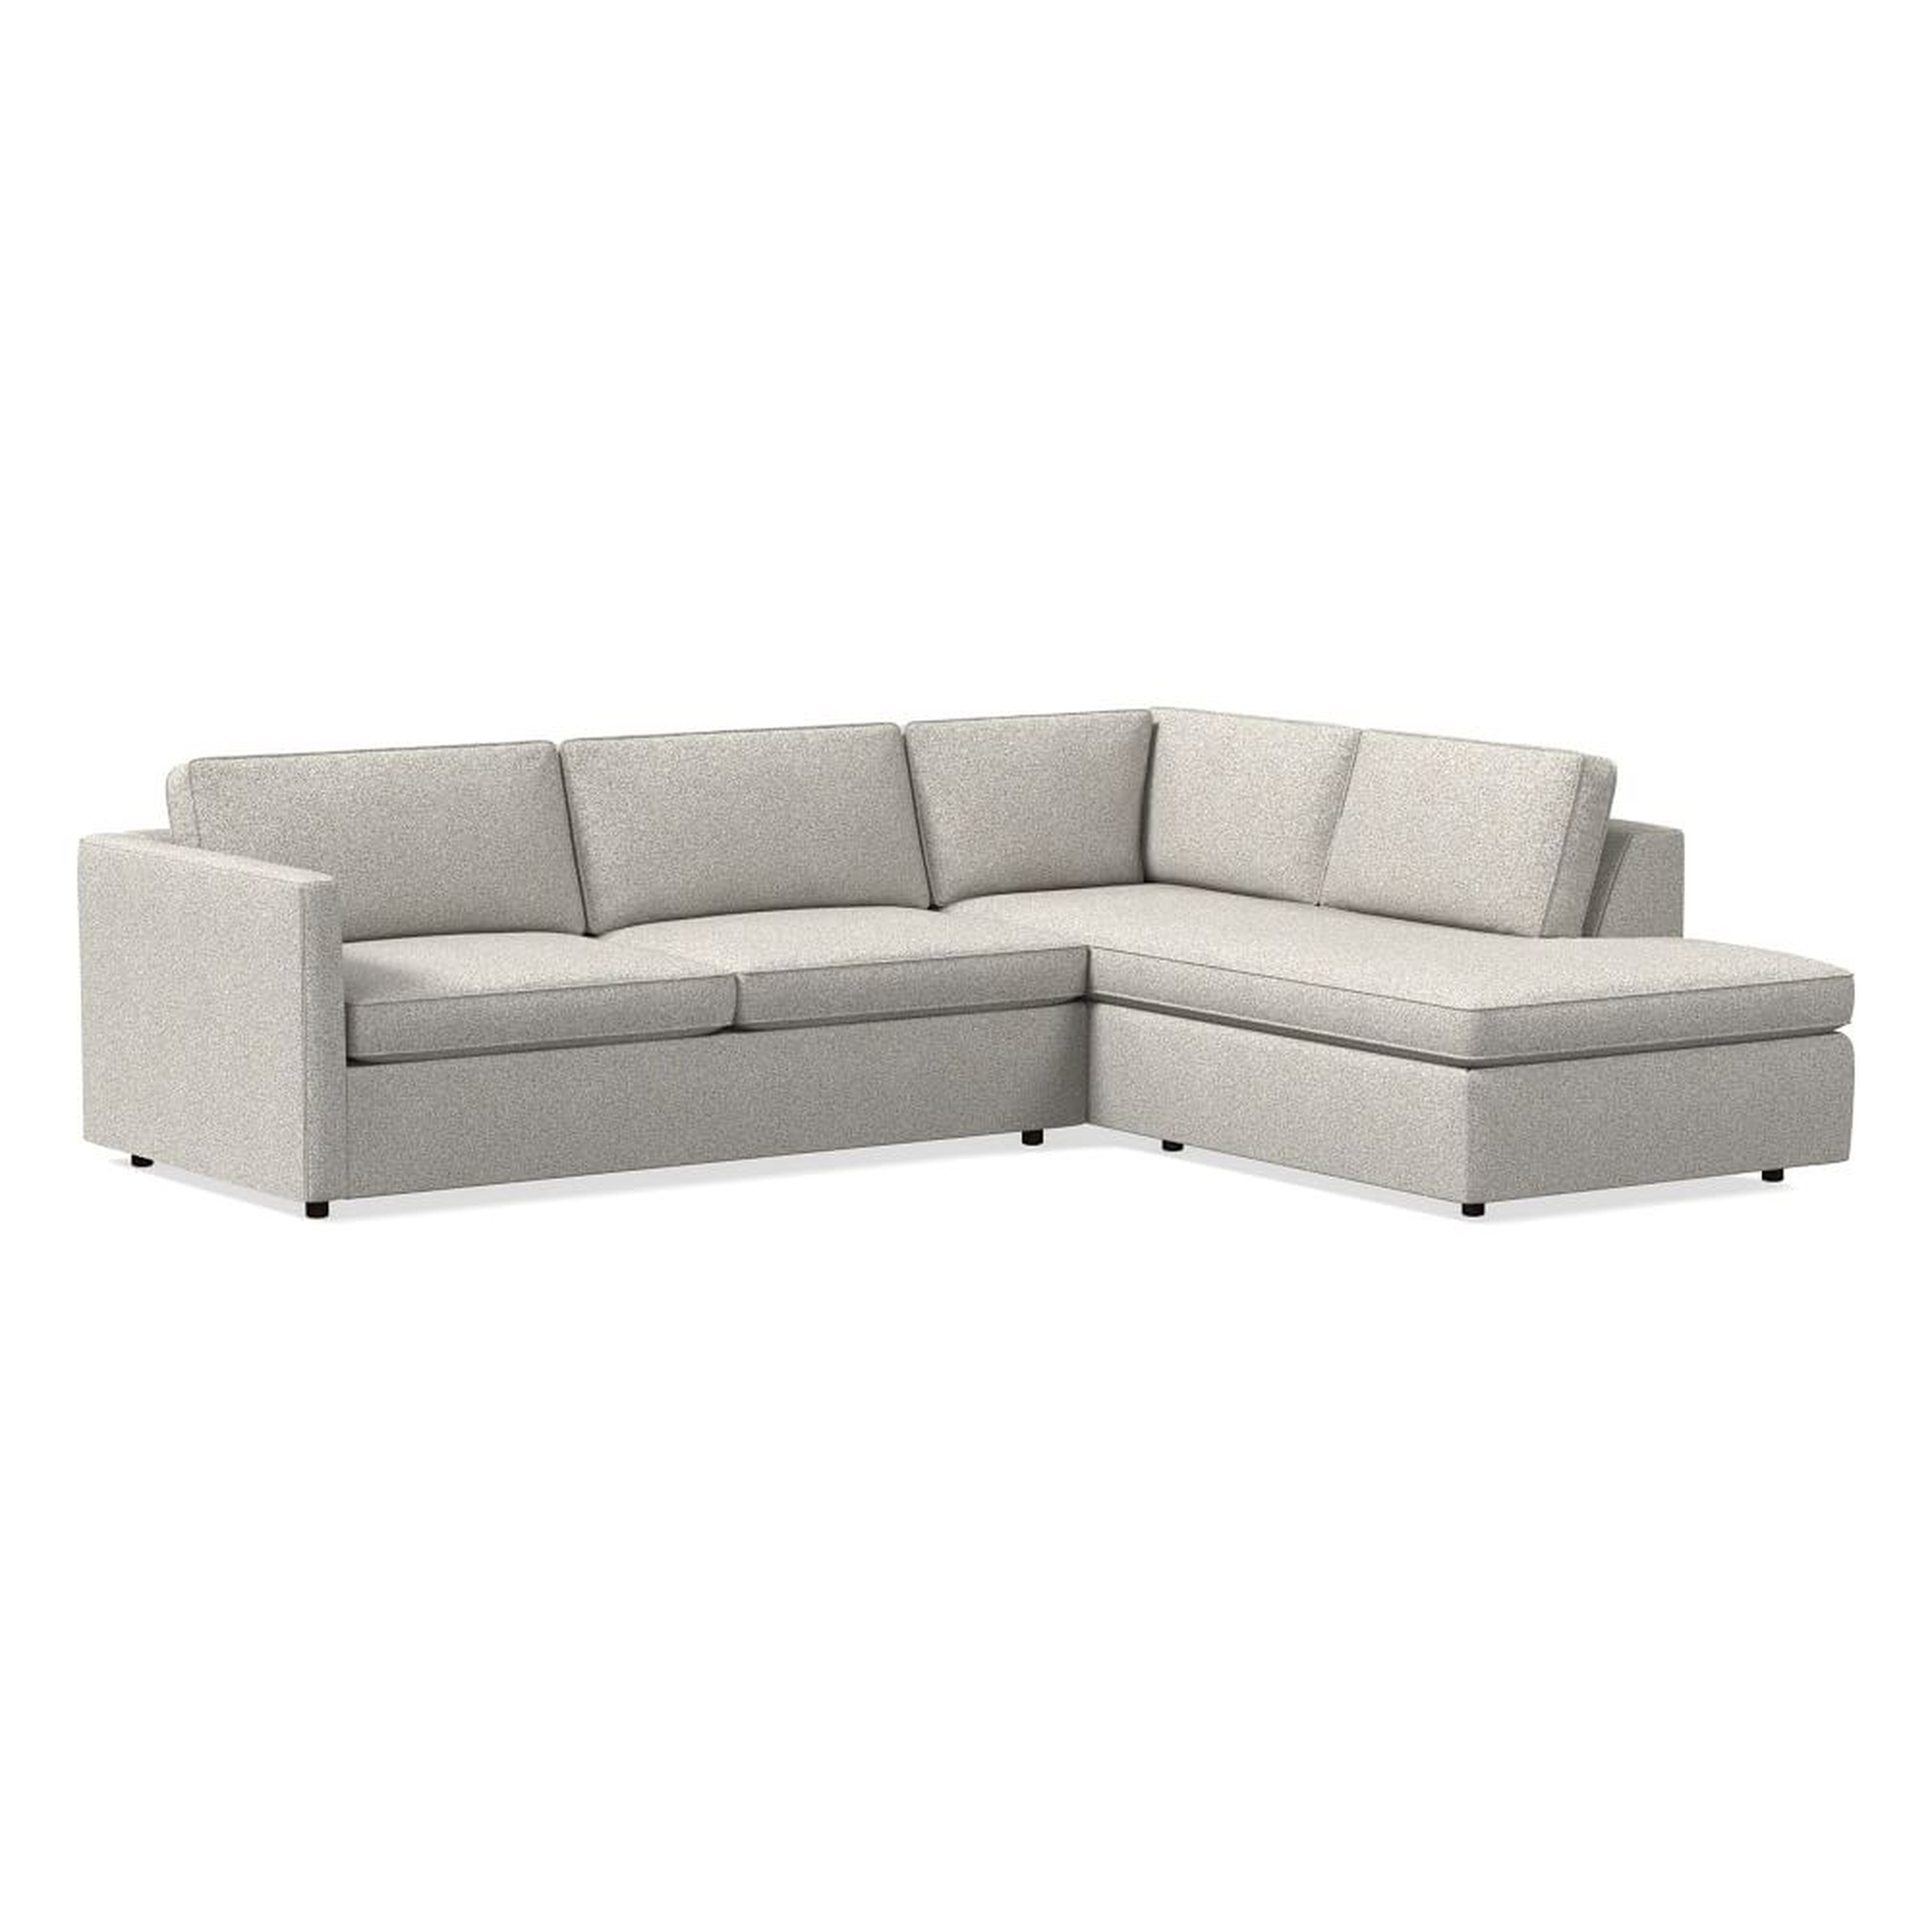 Harris 112" Right Multi-Seat Sleeper Sectional w/ Bumper Chaise, Chenille Tweed, Storm Gray - West Elm